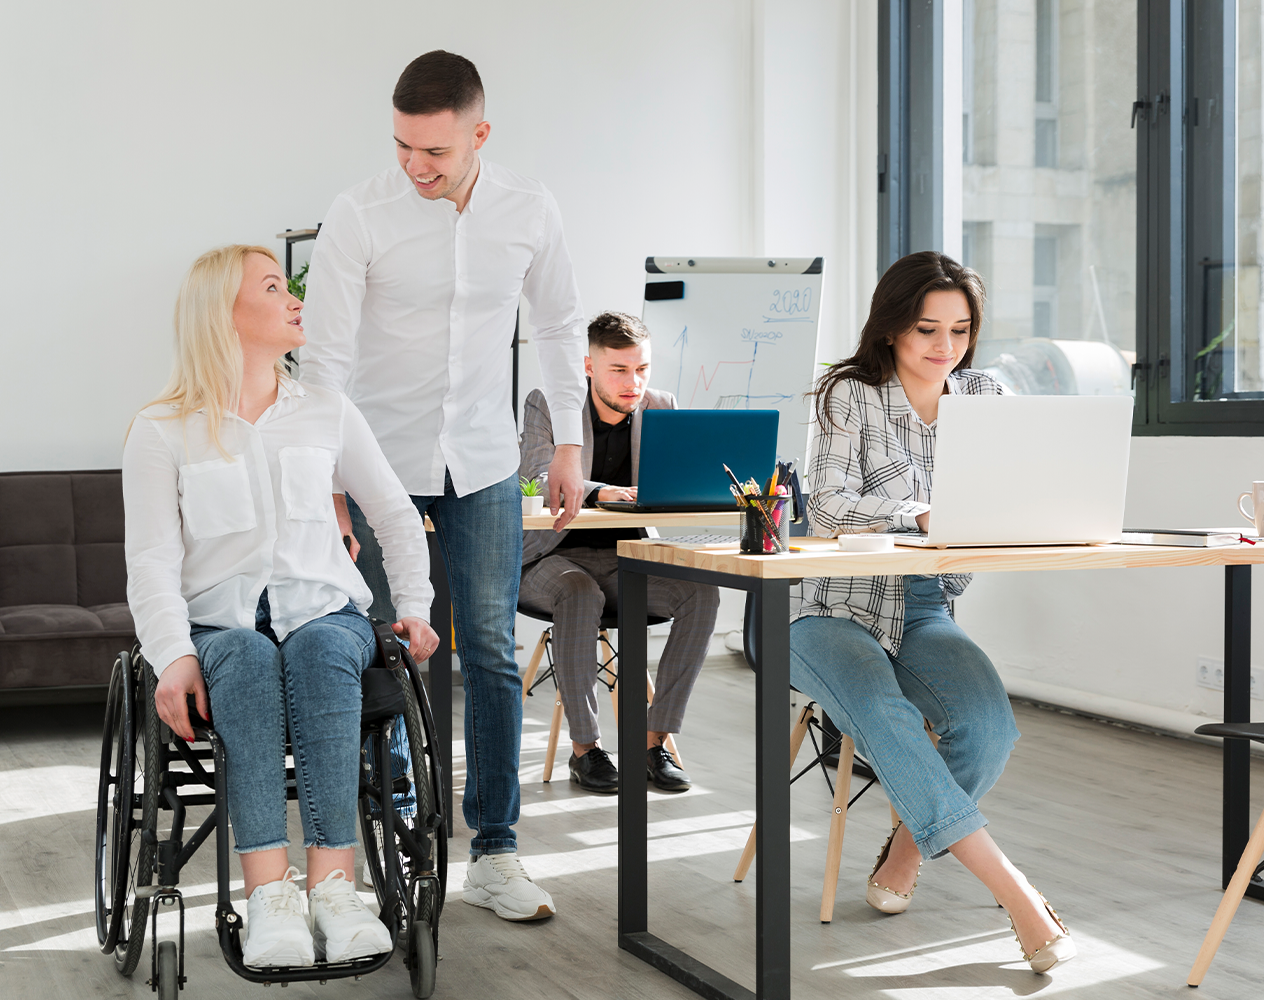 Picture of a man and woman working on laptops, while a man and a woman in a wheel chair walk by.